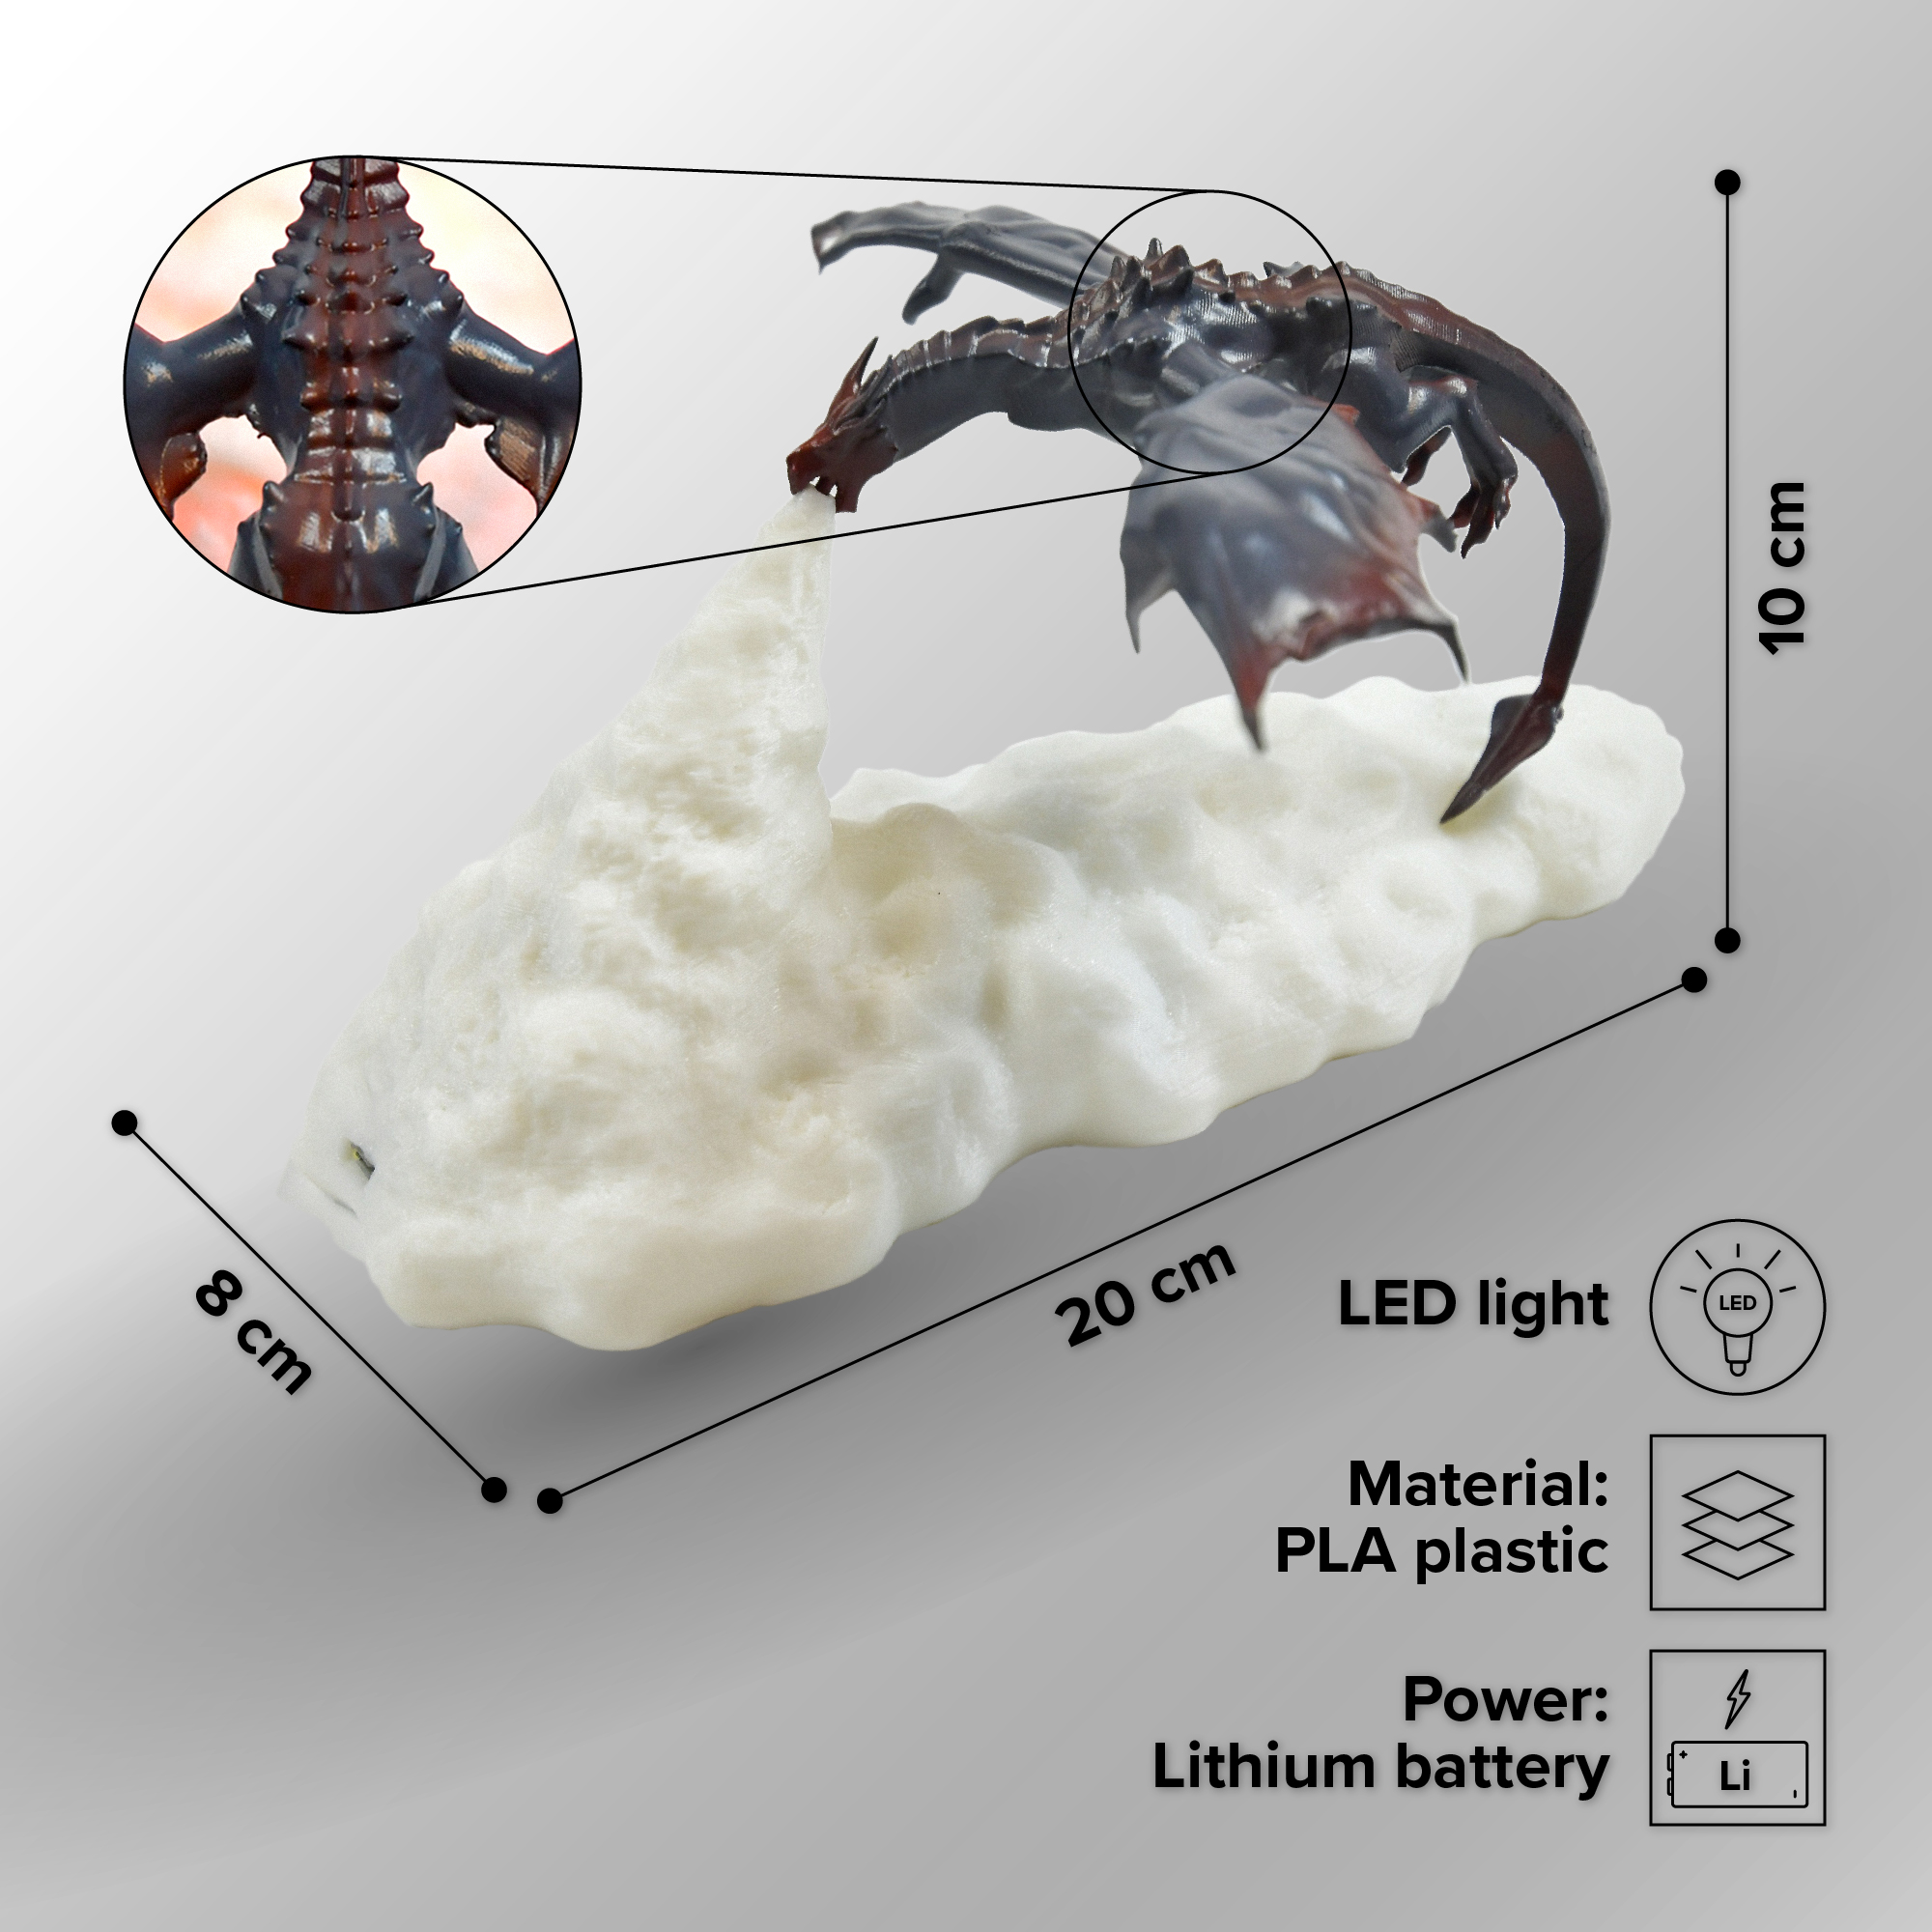 3D Print Dragon Lamp (drachen lampe), Dragon Fire Breathing Light with LED Warm Light, USB Rechargeable Night Light Dragon Gift for Children's Room